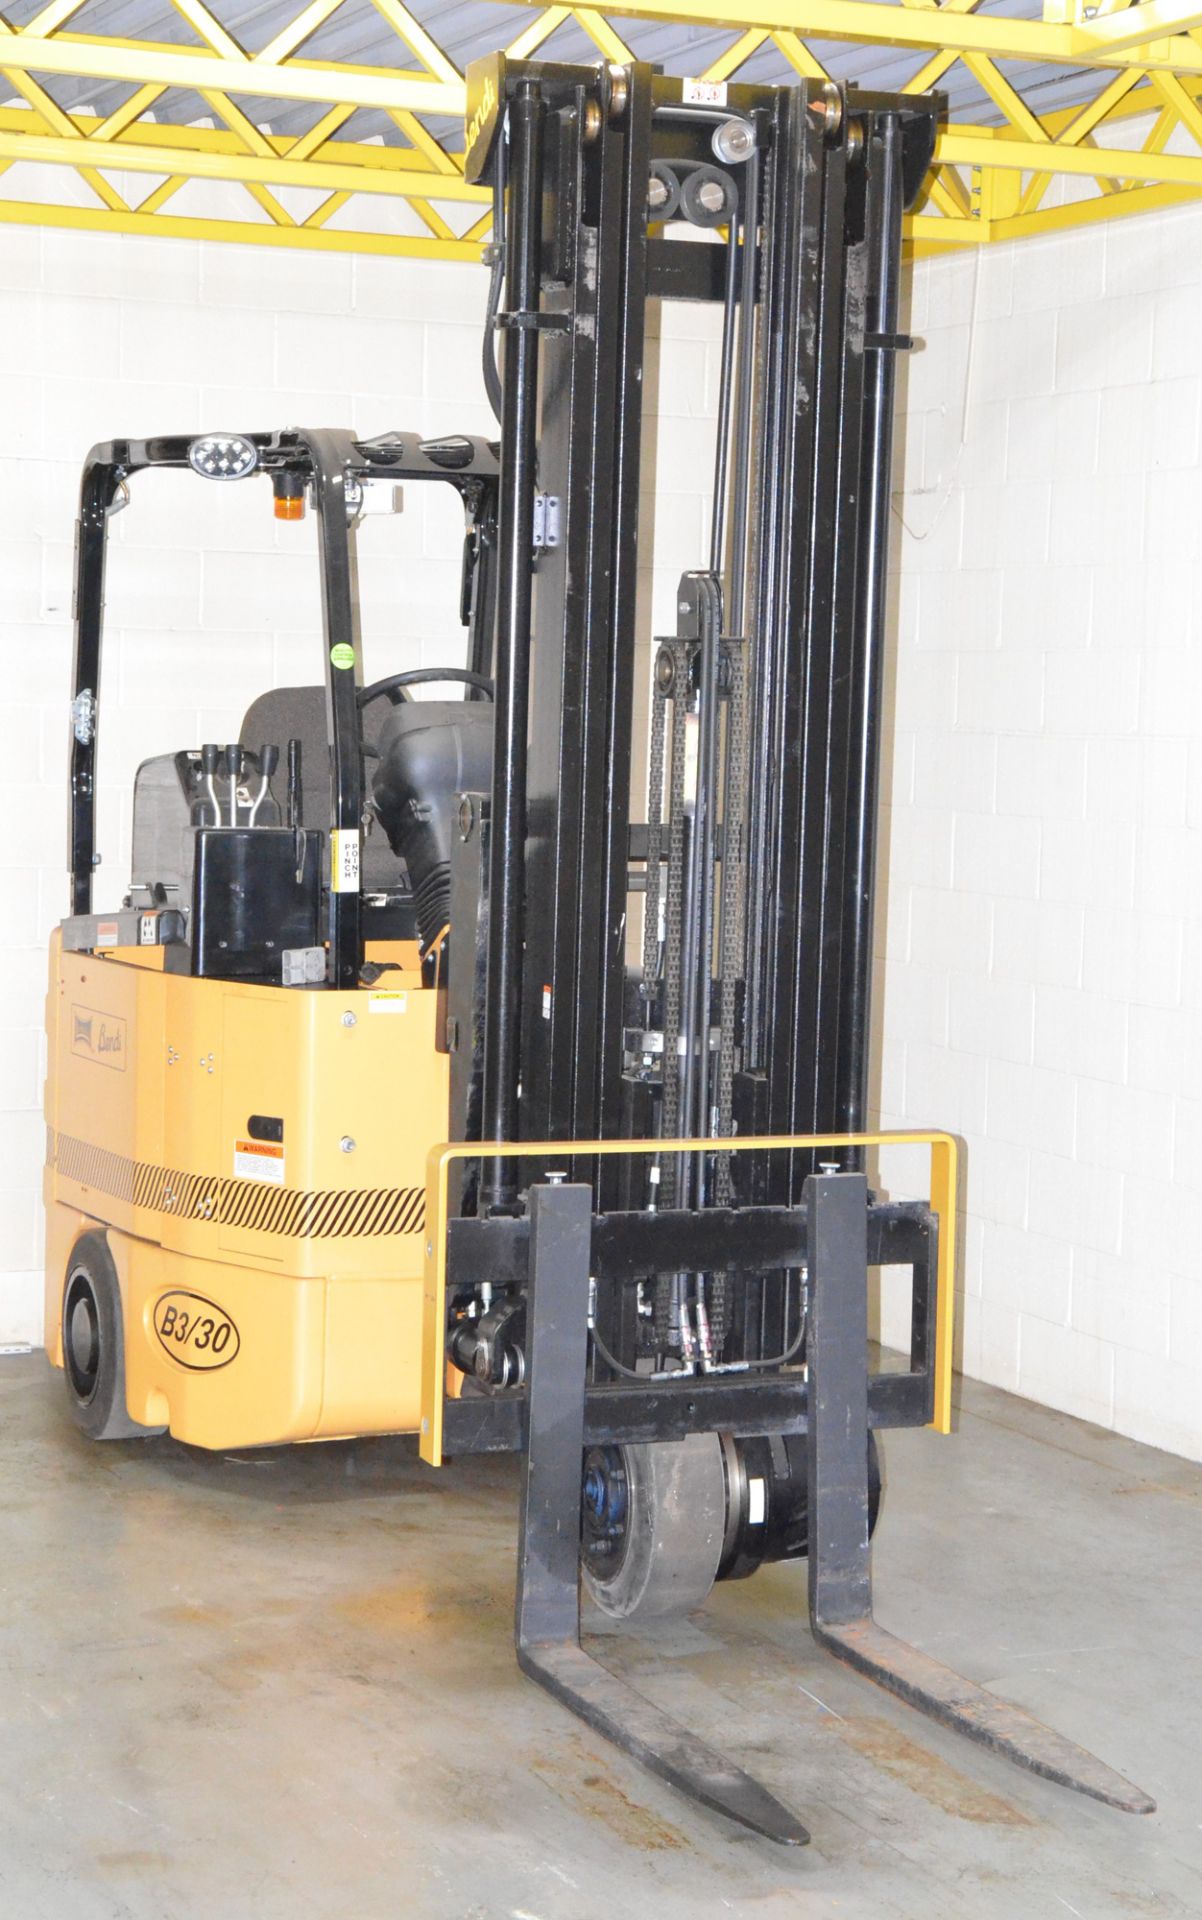 DREXEL LANDOLL B3/30E180D 48V ELECTRIC NARROW AISLE 3-WHEEL FORKLIFT WITH 3-STAGE SWING MAST, 3, - Image 2 of 8